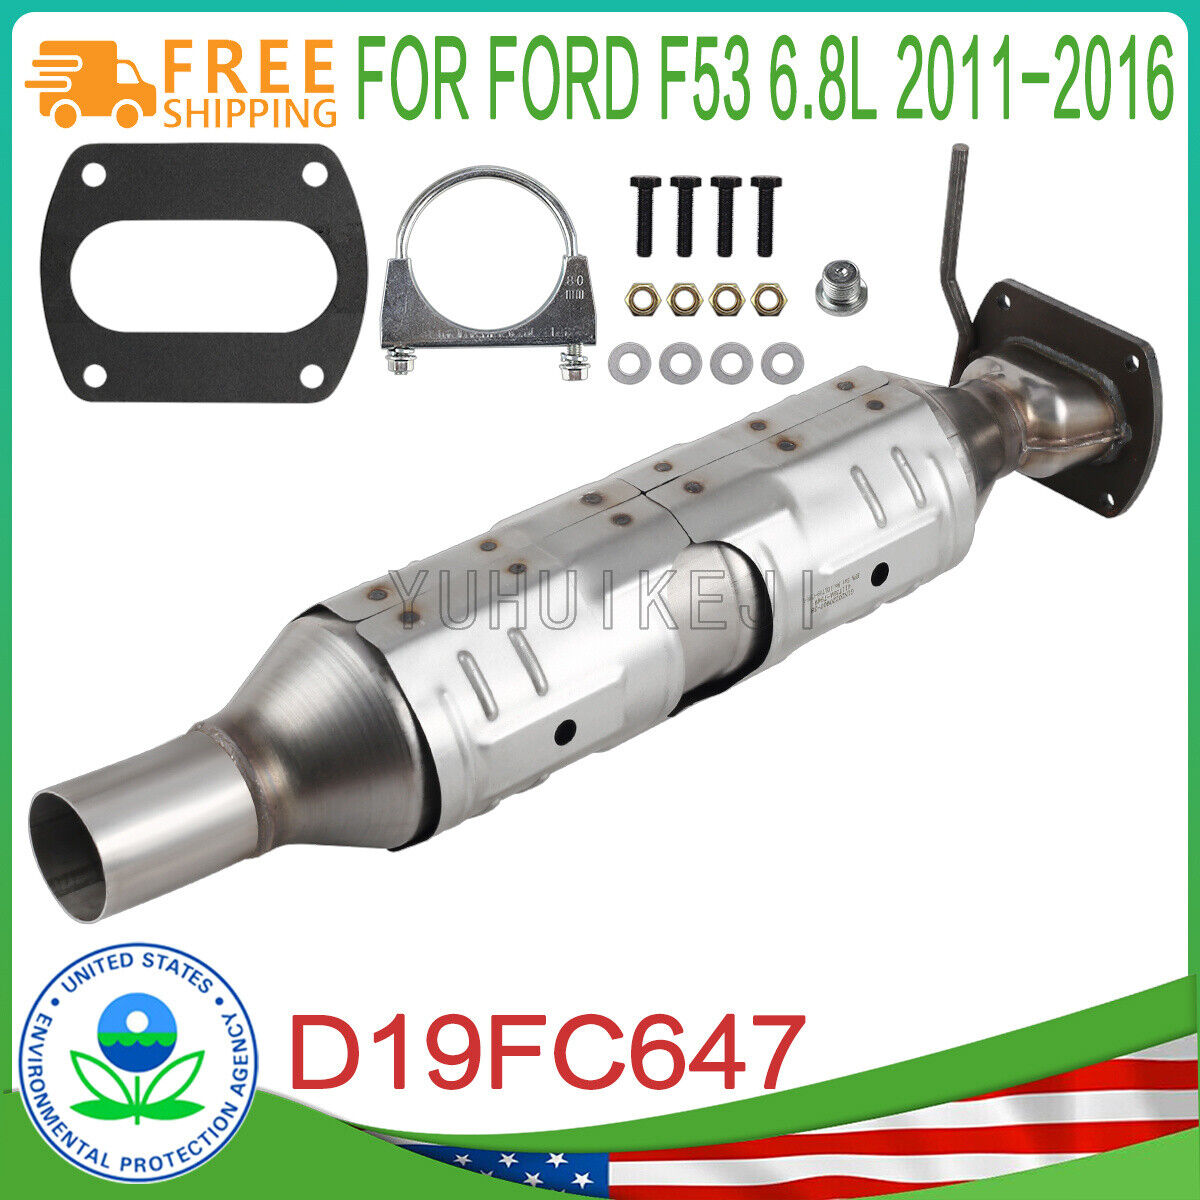 Catalytic Converter Fits 2011-2016 Ford F-53 Motorhome Chassis 6.8L V10 2013